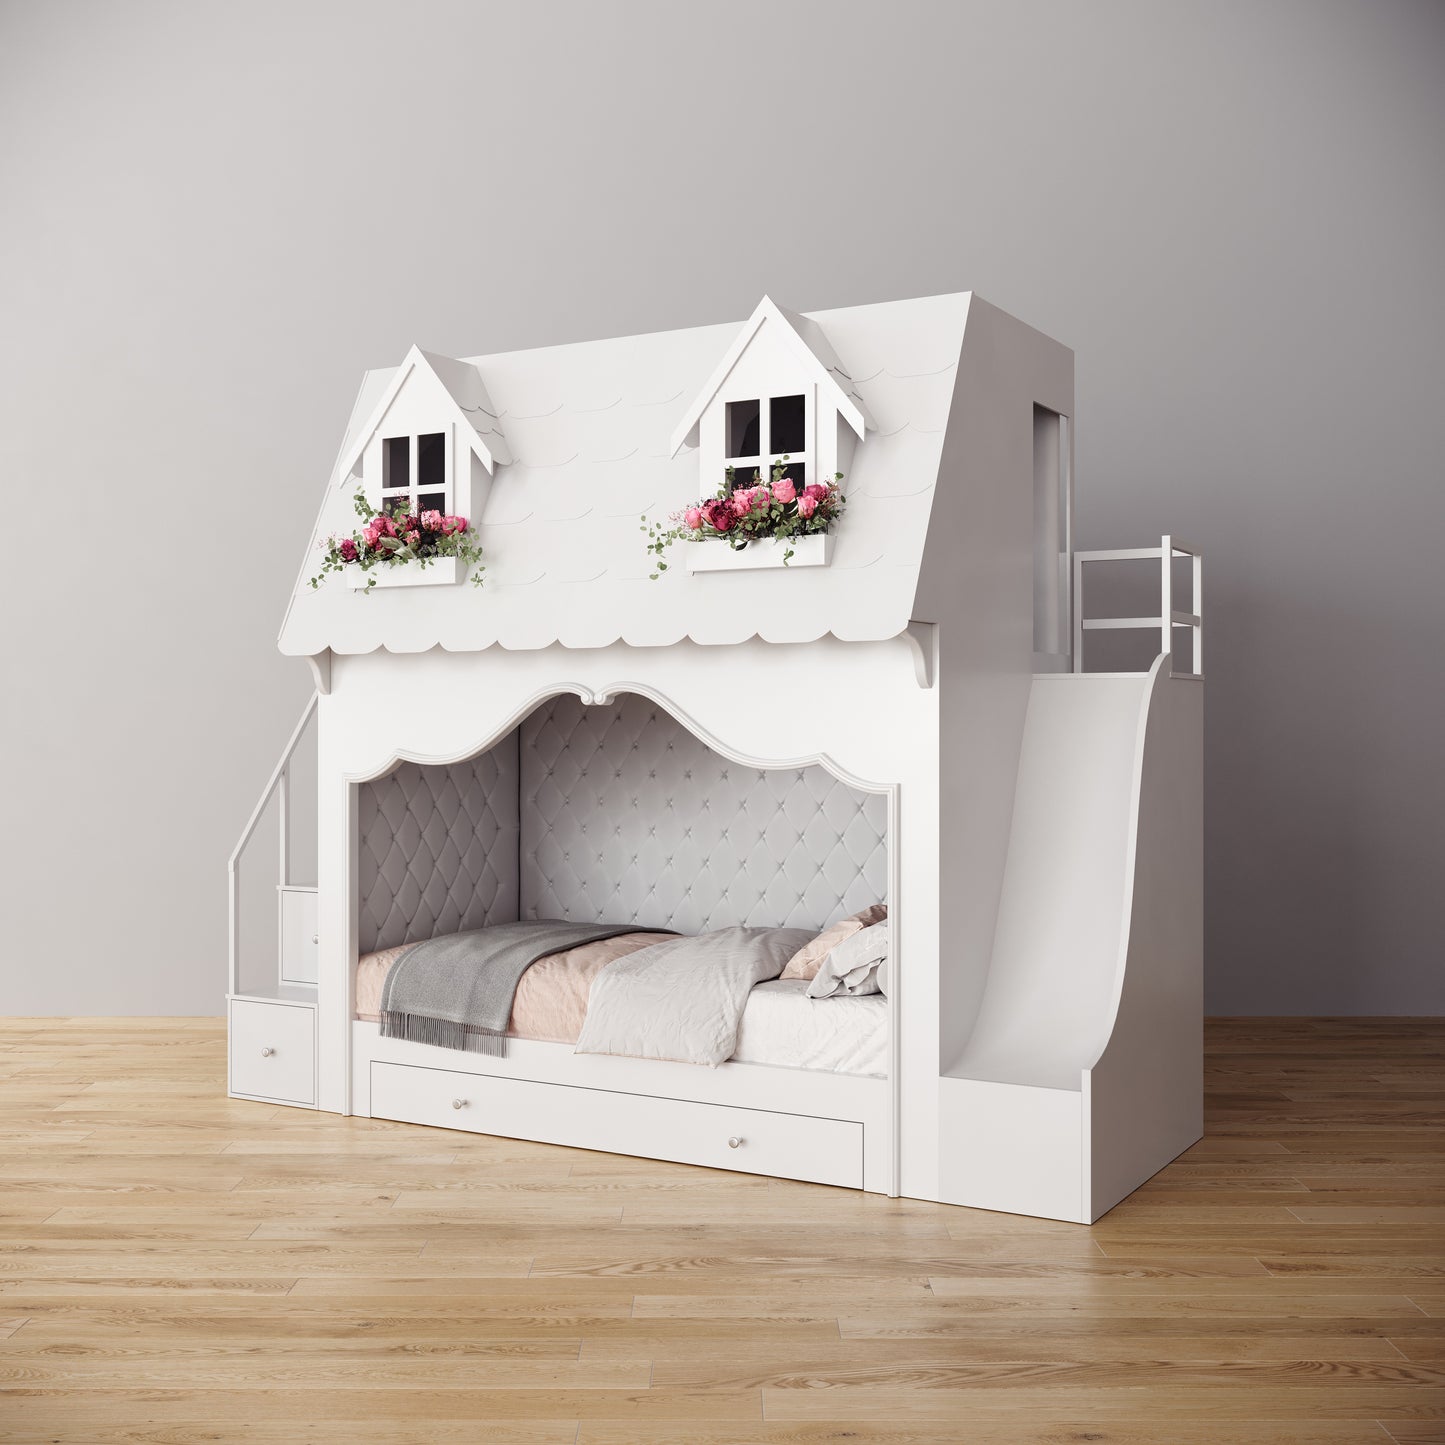 Bambizi House Luxury Toddler Childrens Bed